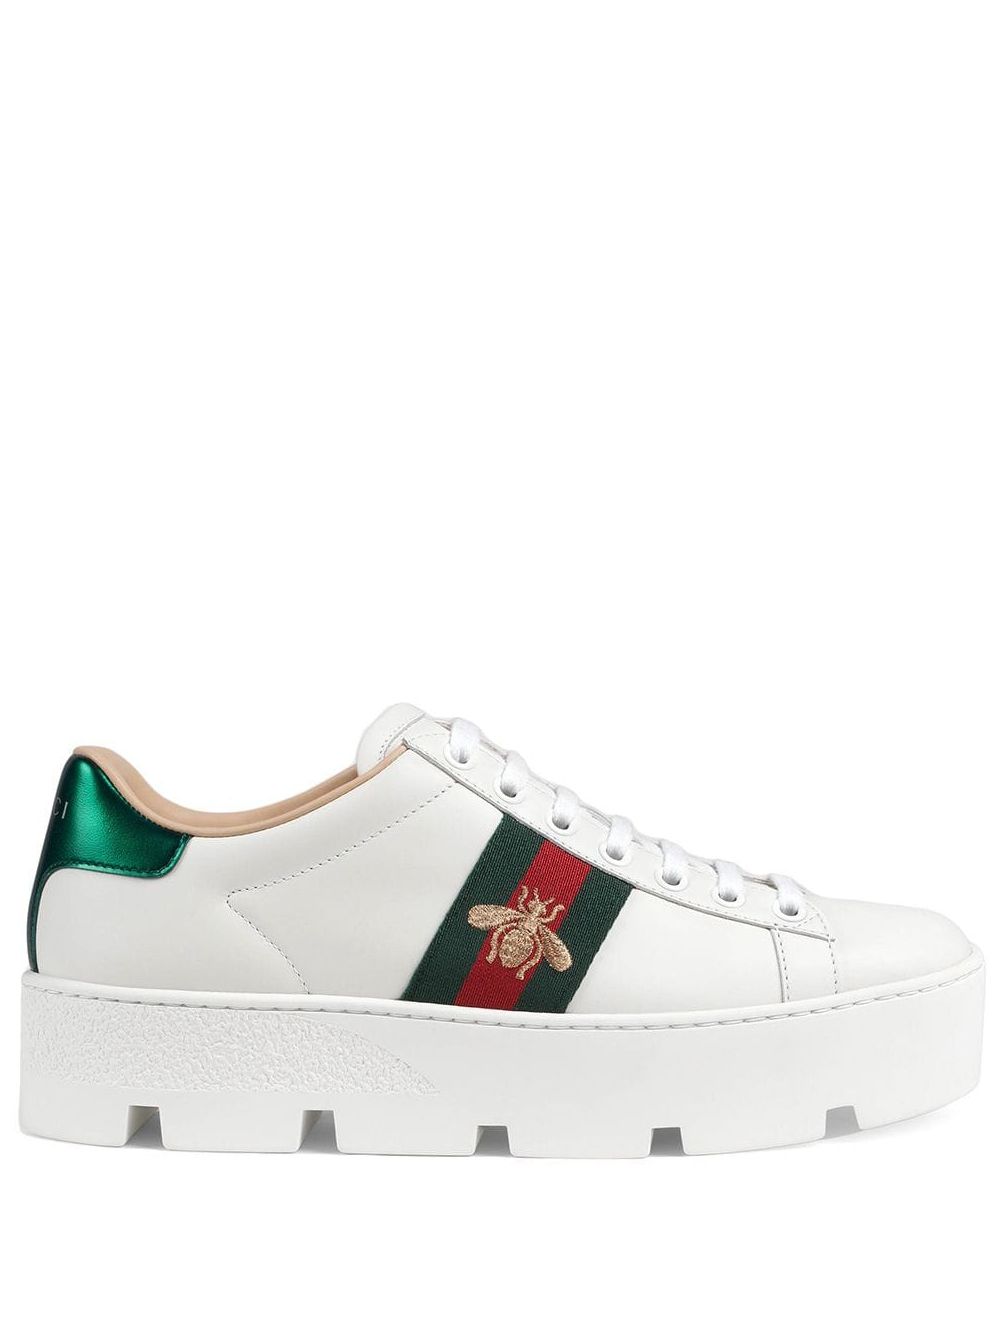 gucci women's ace embroidered sneaker